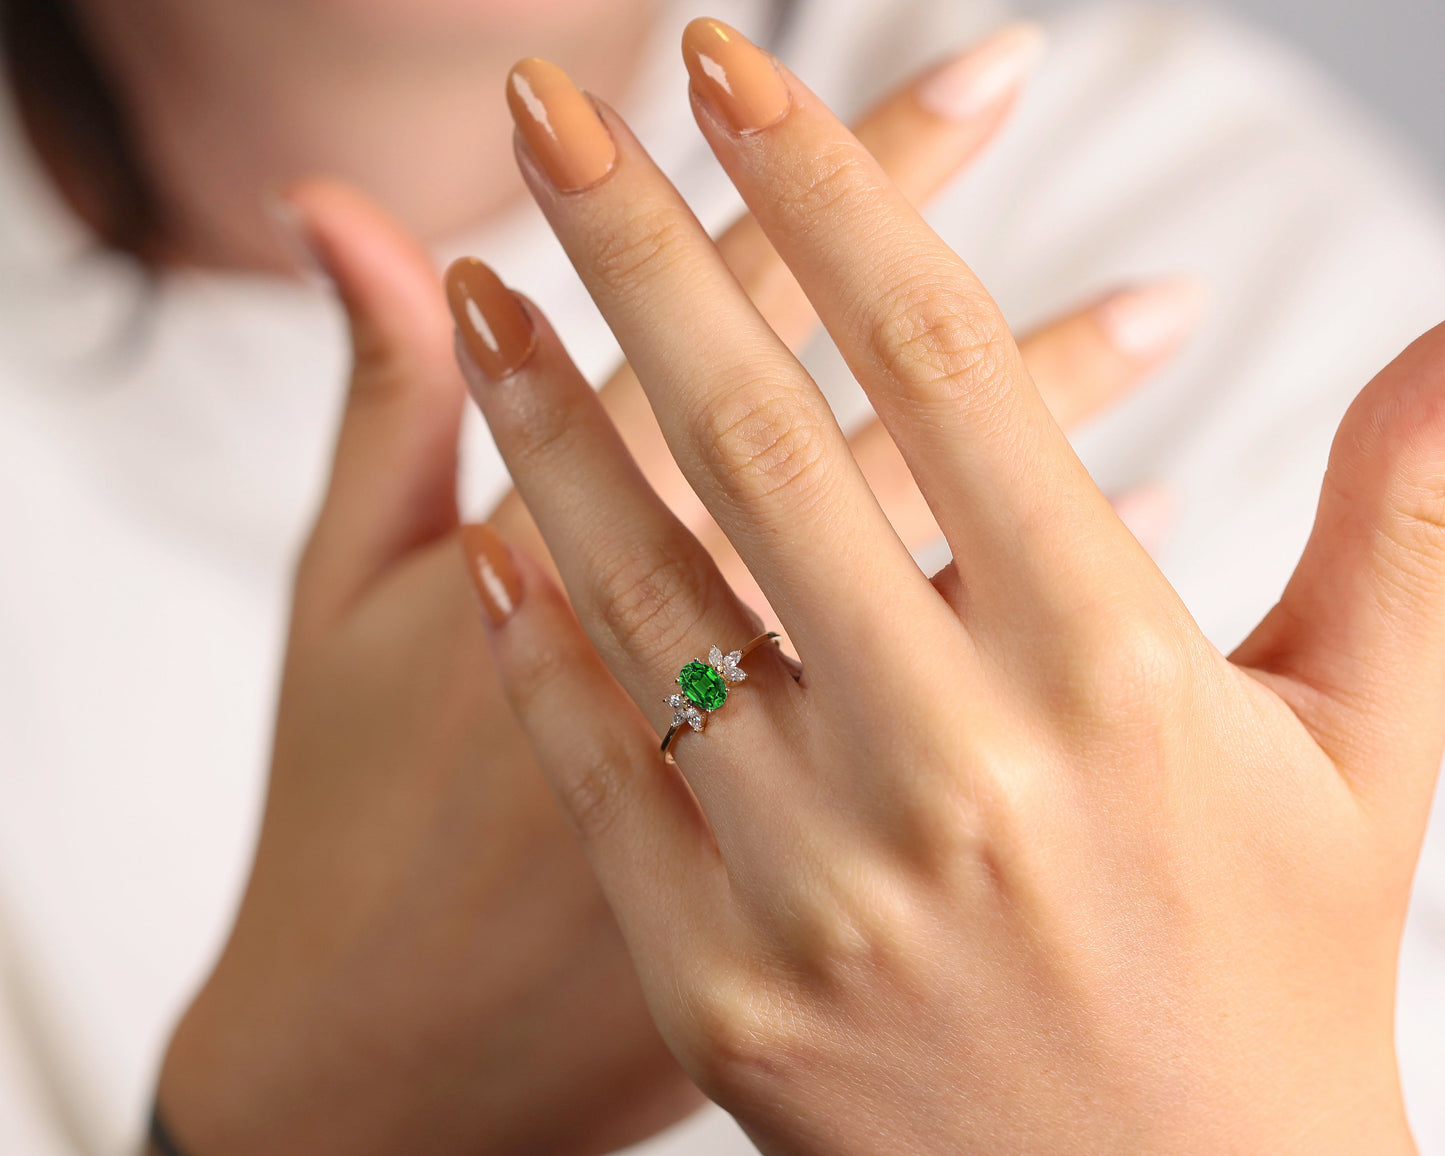 14K Yellow Solid Gold,Multi Stone Ring,Oval Cut Emerald with Marquise Diamond Ring